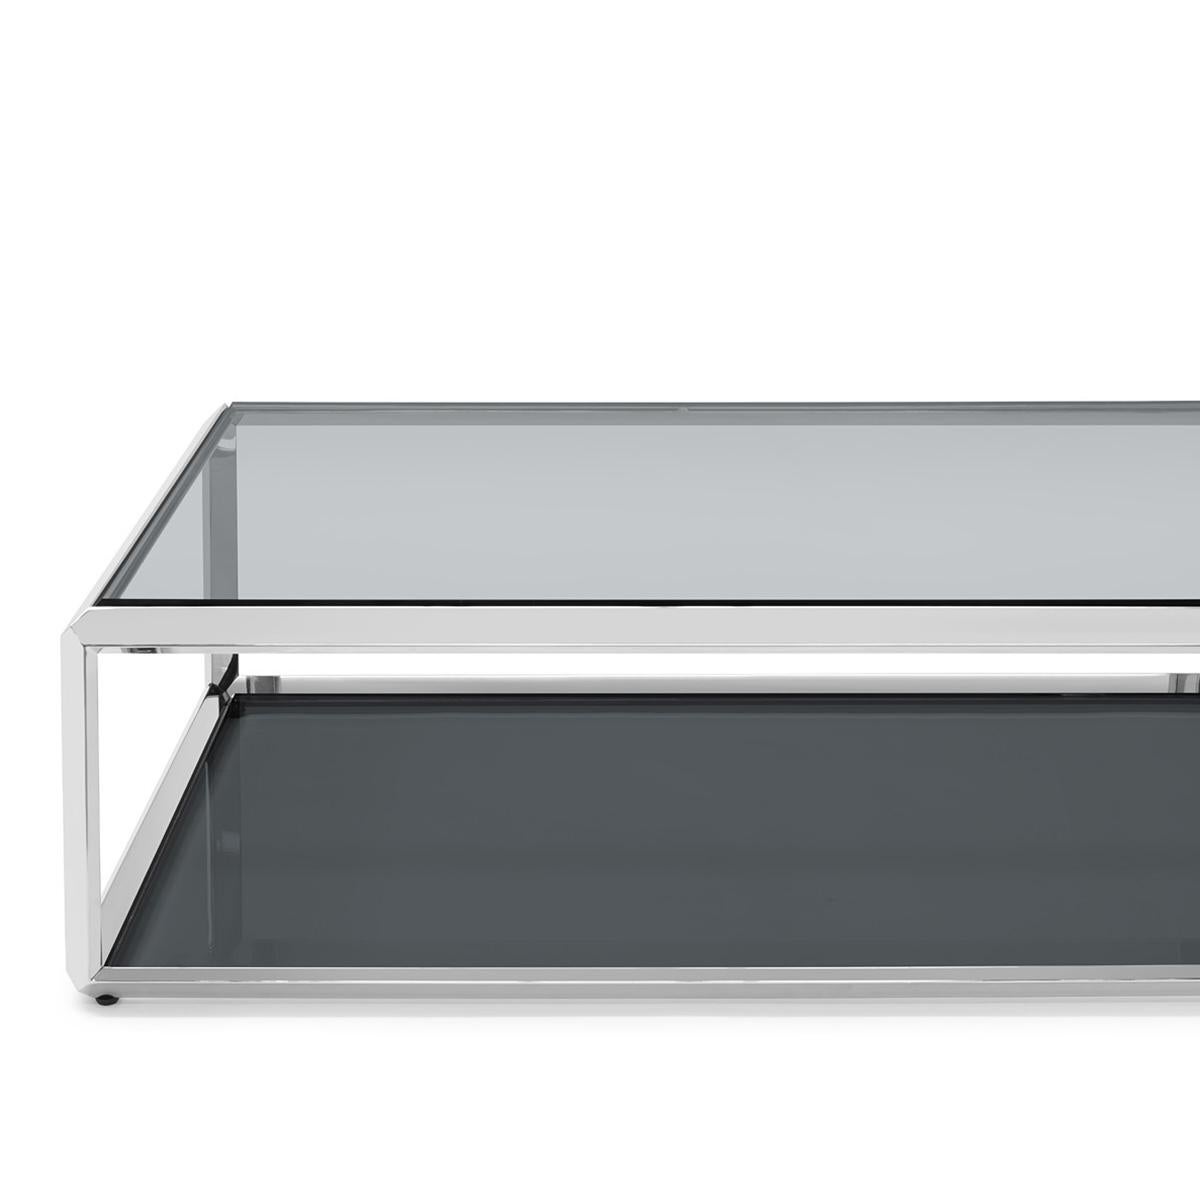 Coffee table Casiopee chrome with structure in chrome finish,
with beveled smocked glass top up and down the coffee table.